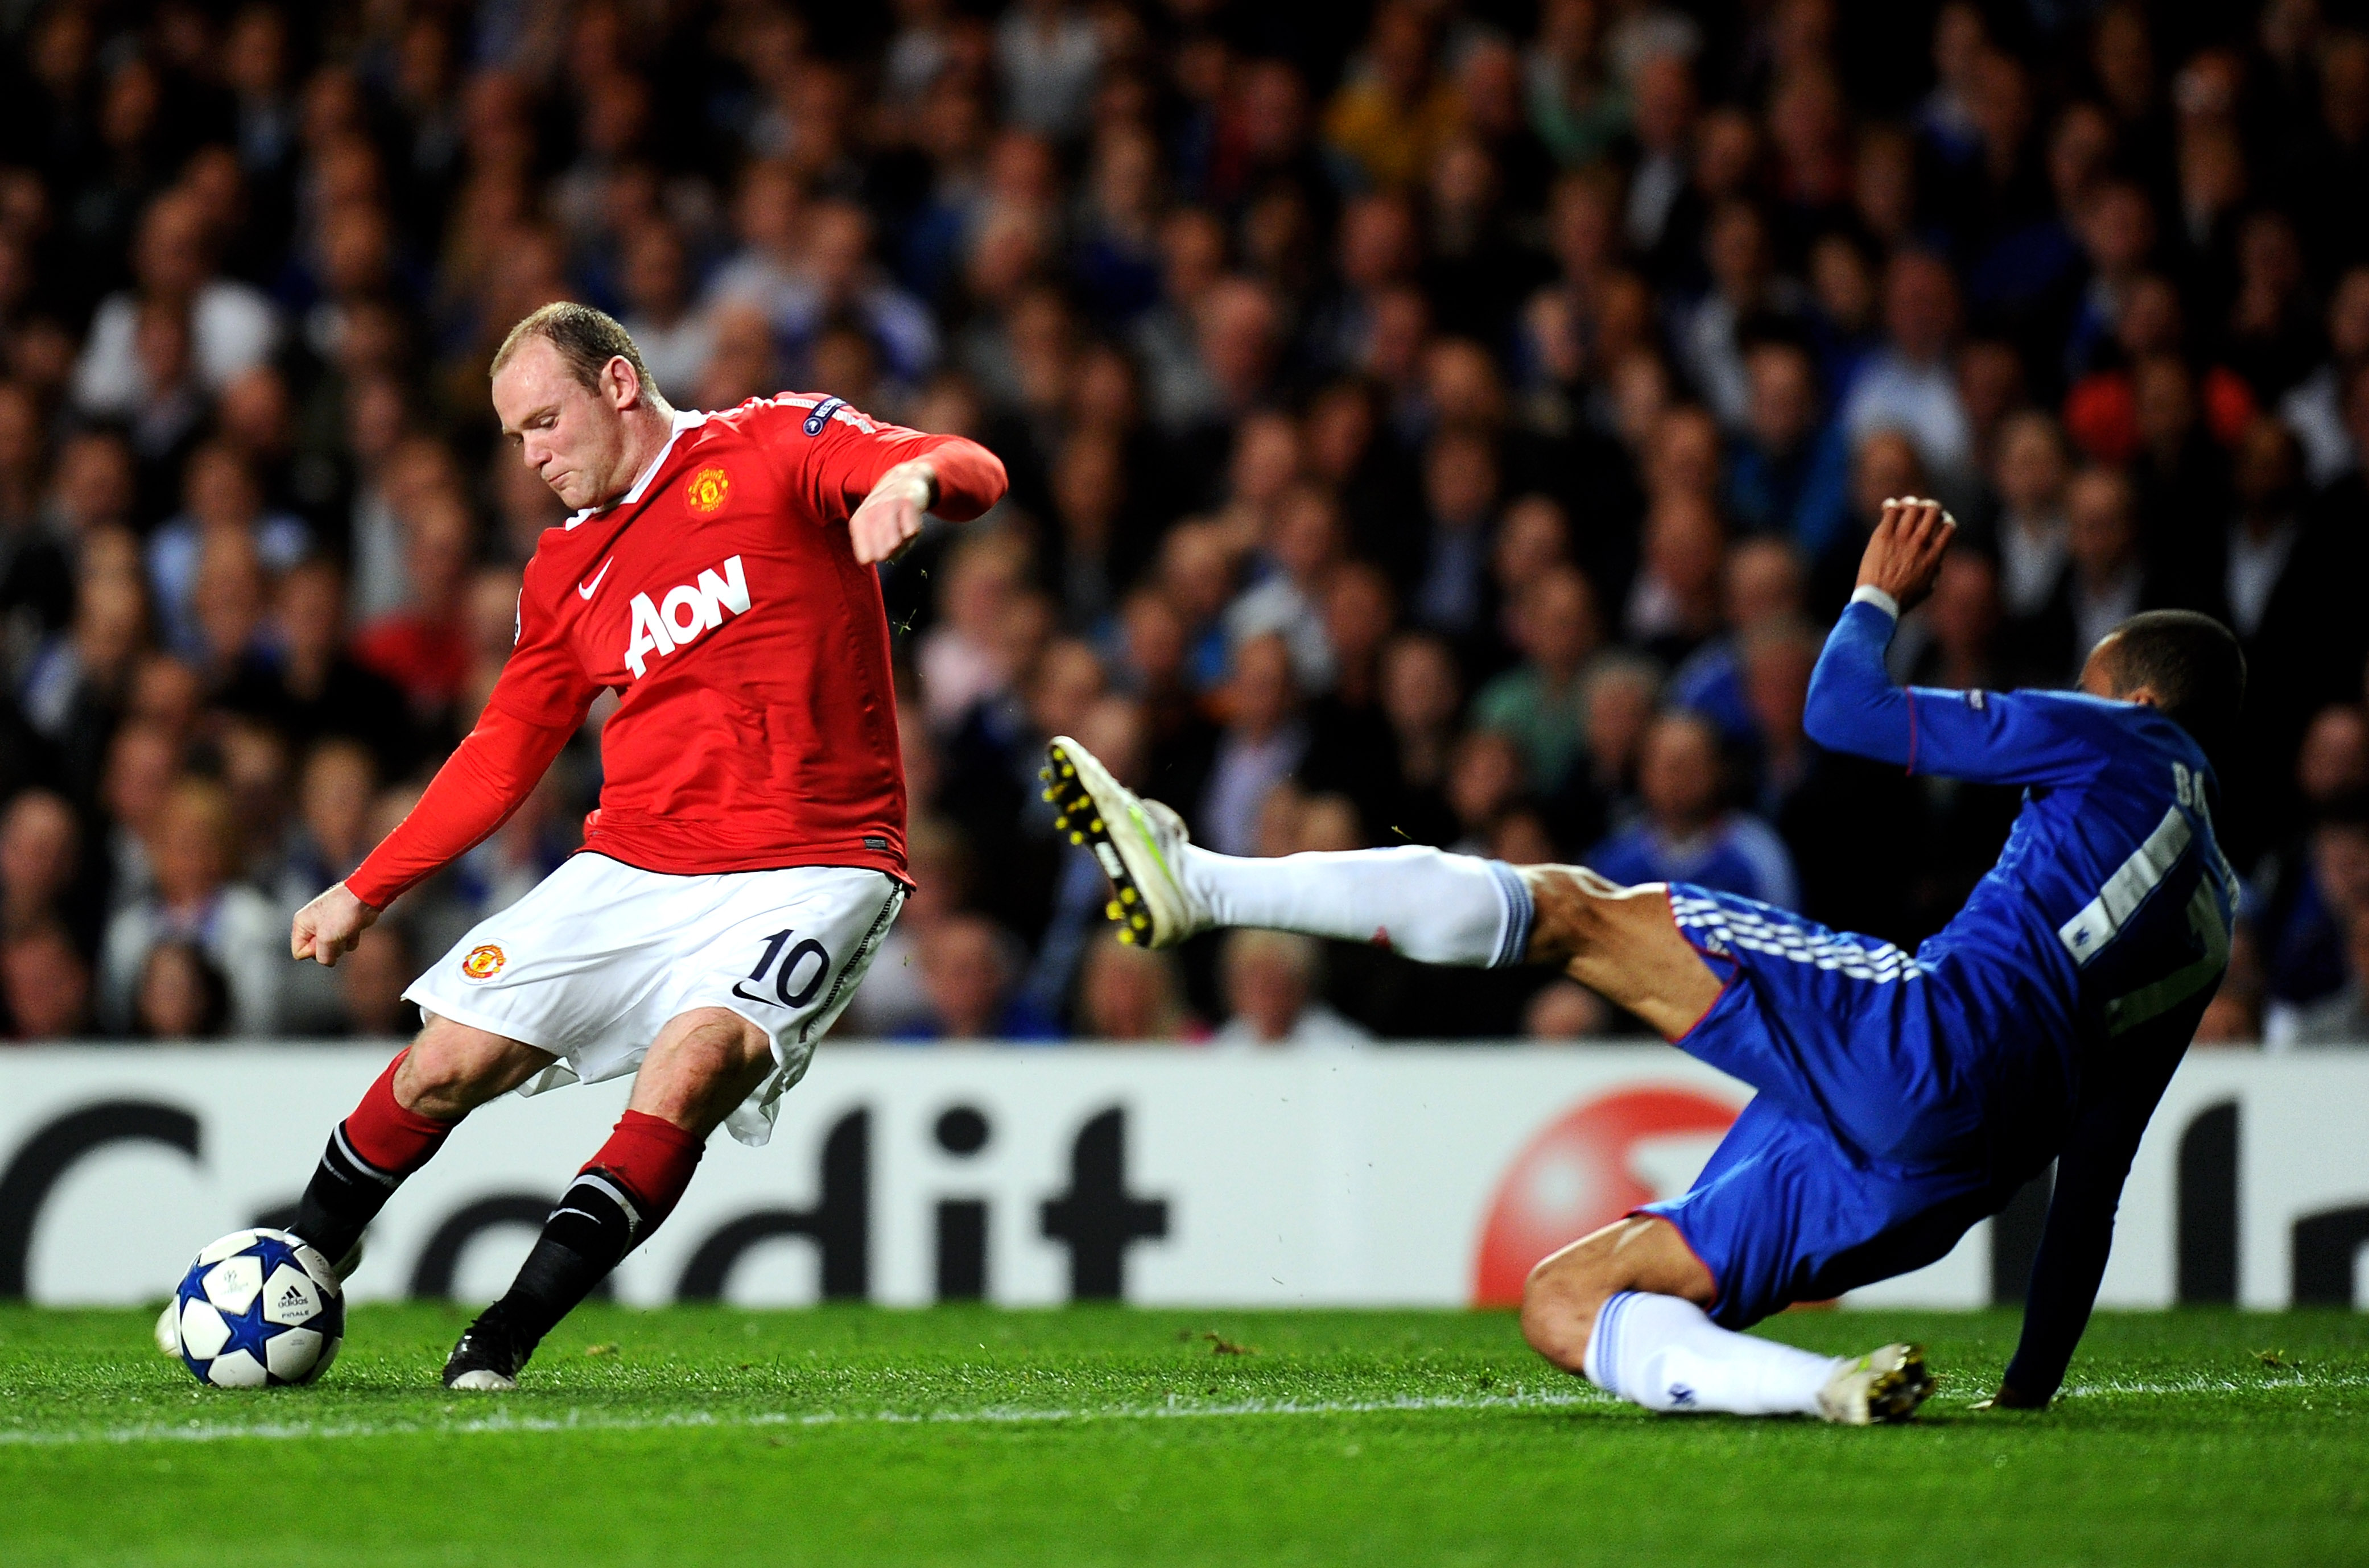 LONDON, ENGLAND - APRIL 06:  Wayne Rooney of Manchester United takes a shot on goal as Jose Bosingwa of Chelsea closes in during the UEFA Champions League quarter final first leg match between Chelsea and Manchester United at Stamford Bridge on April 6, 2